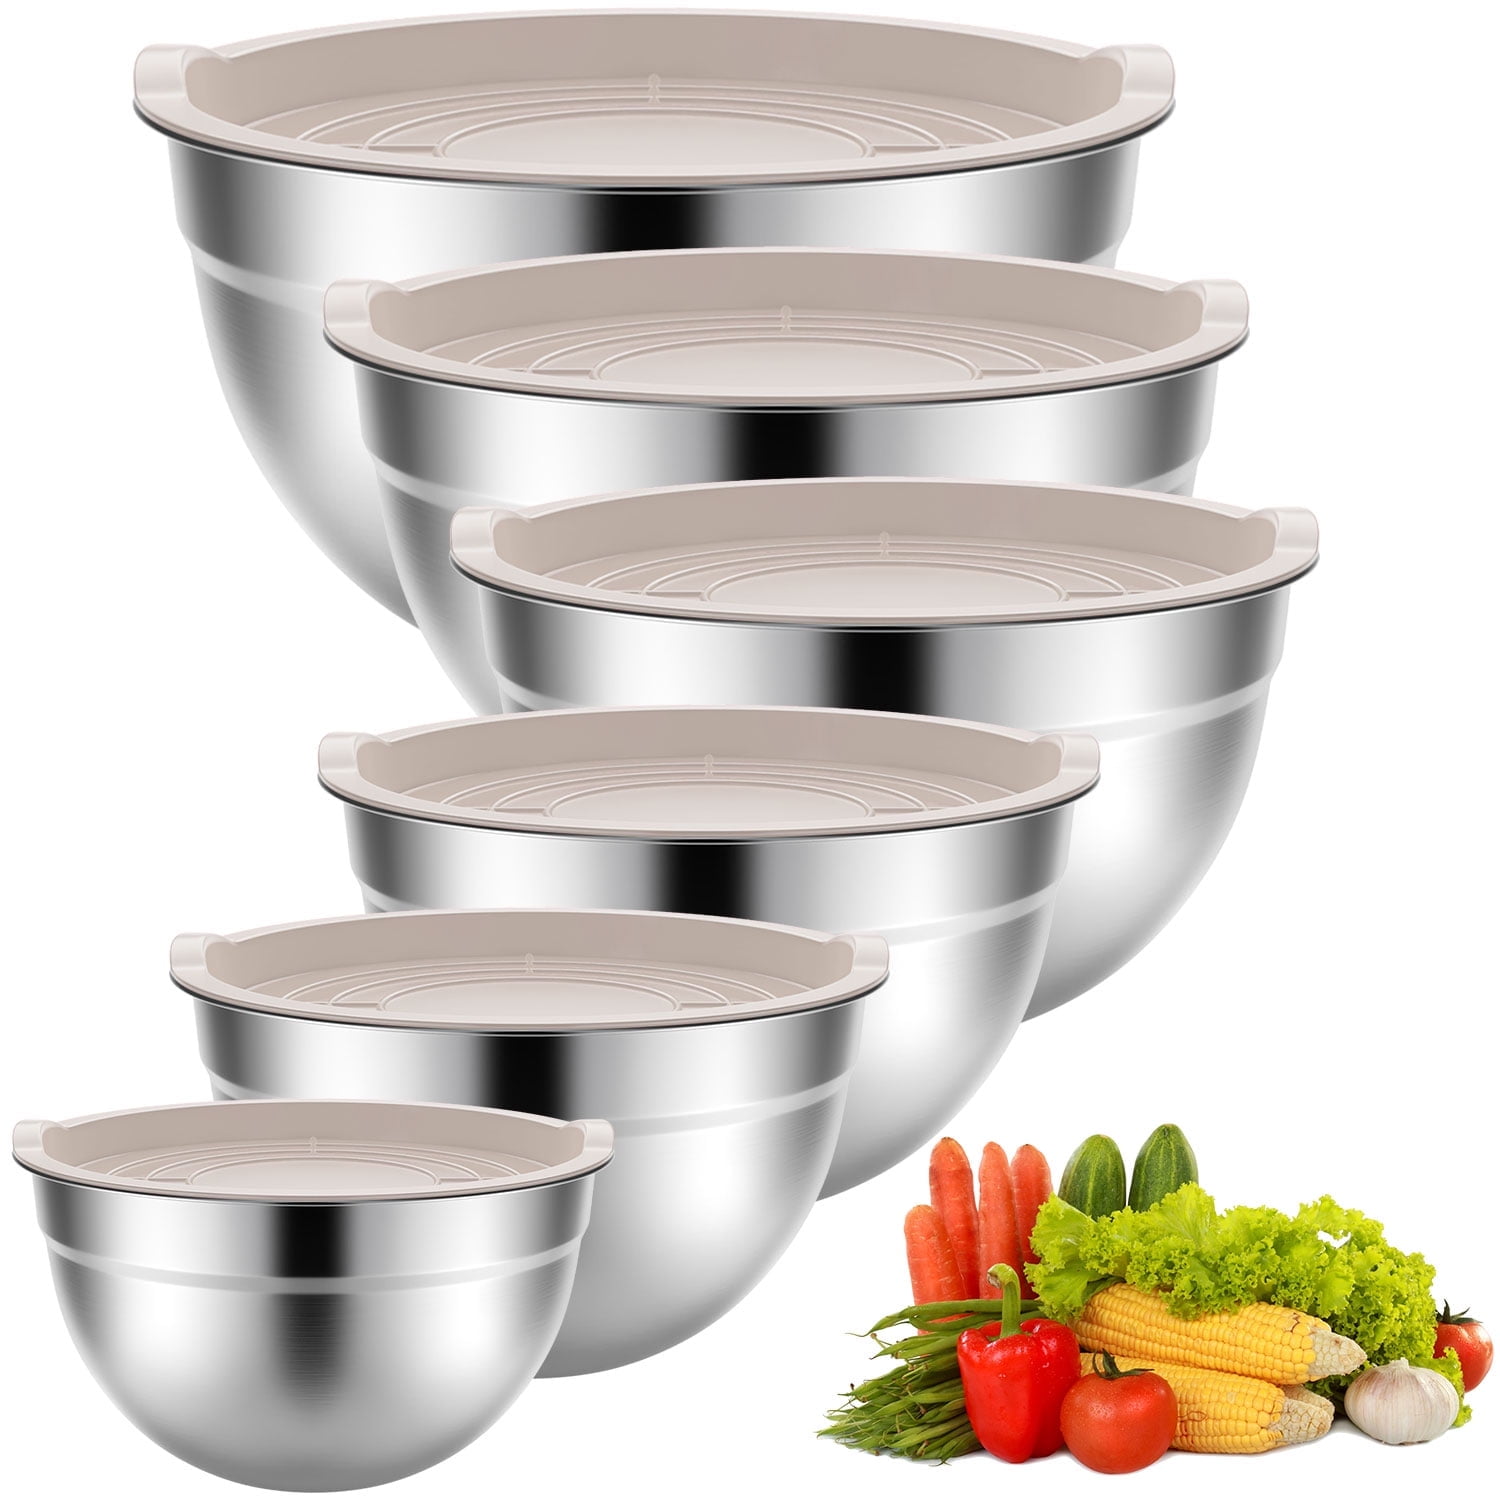 TINANA Mixing Bowls with Lids: Stainless Steel Mixing Bowls Set